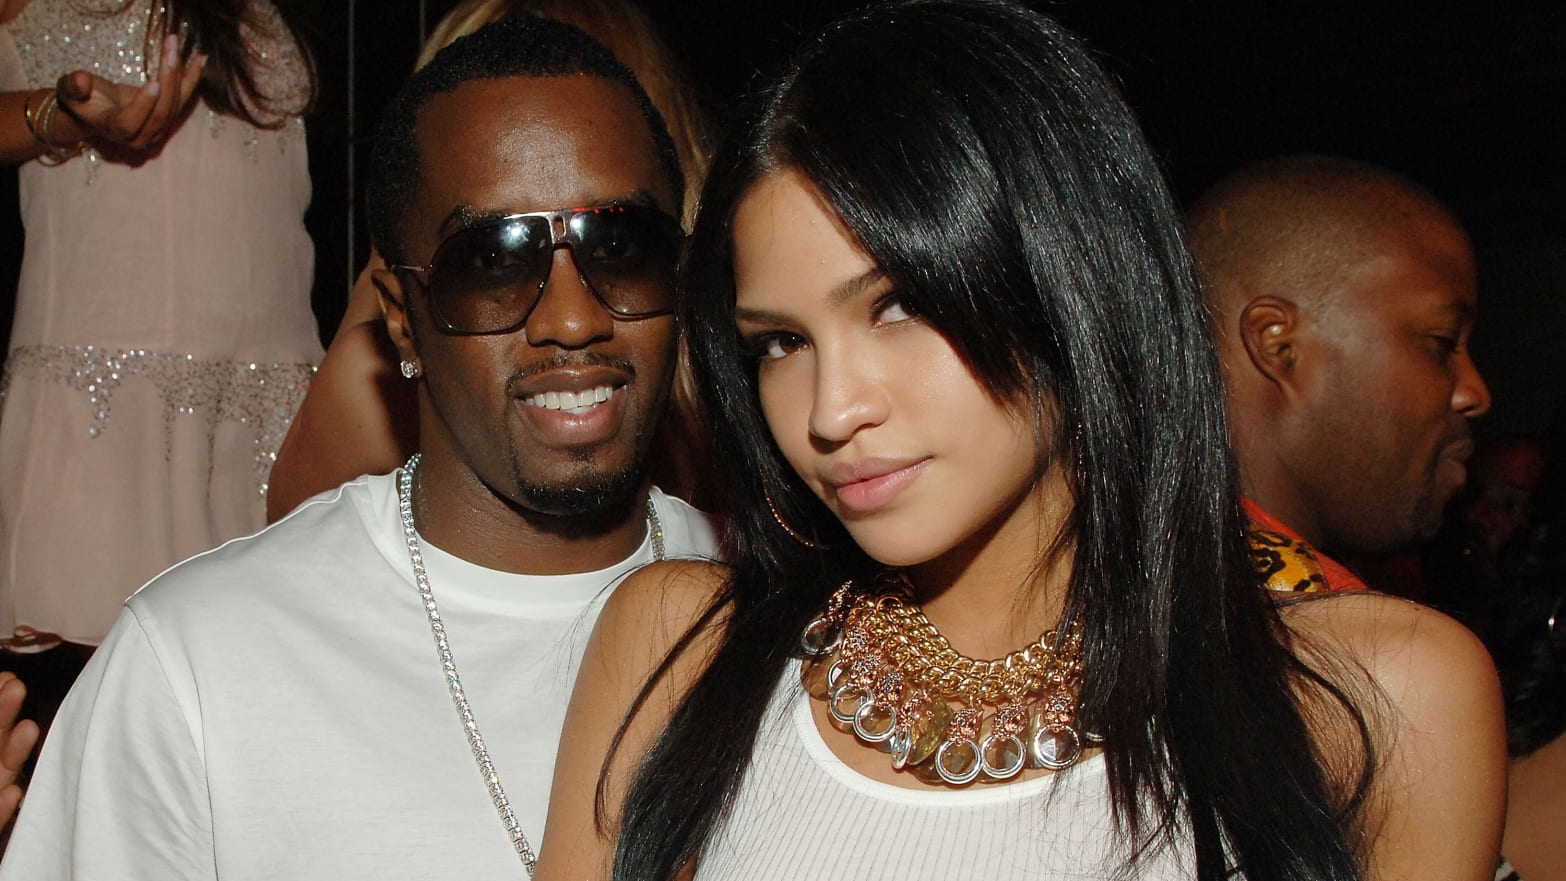 Sean 'Diddy' Combs Seen Physically Assaulting Cassie Ventura in 2016 Footage miixtapechiick